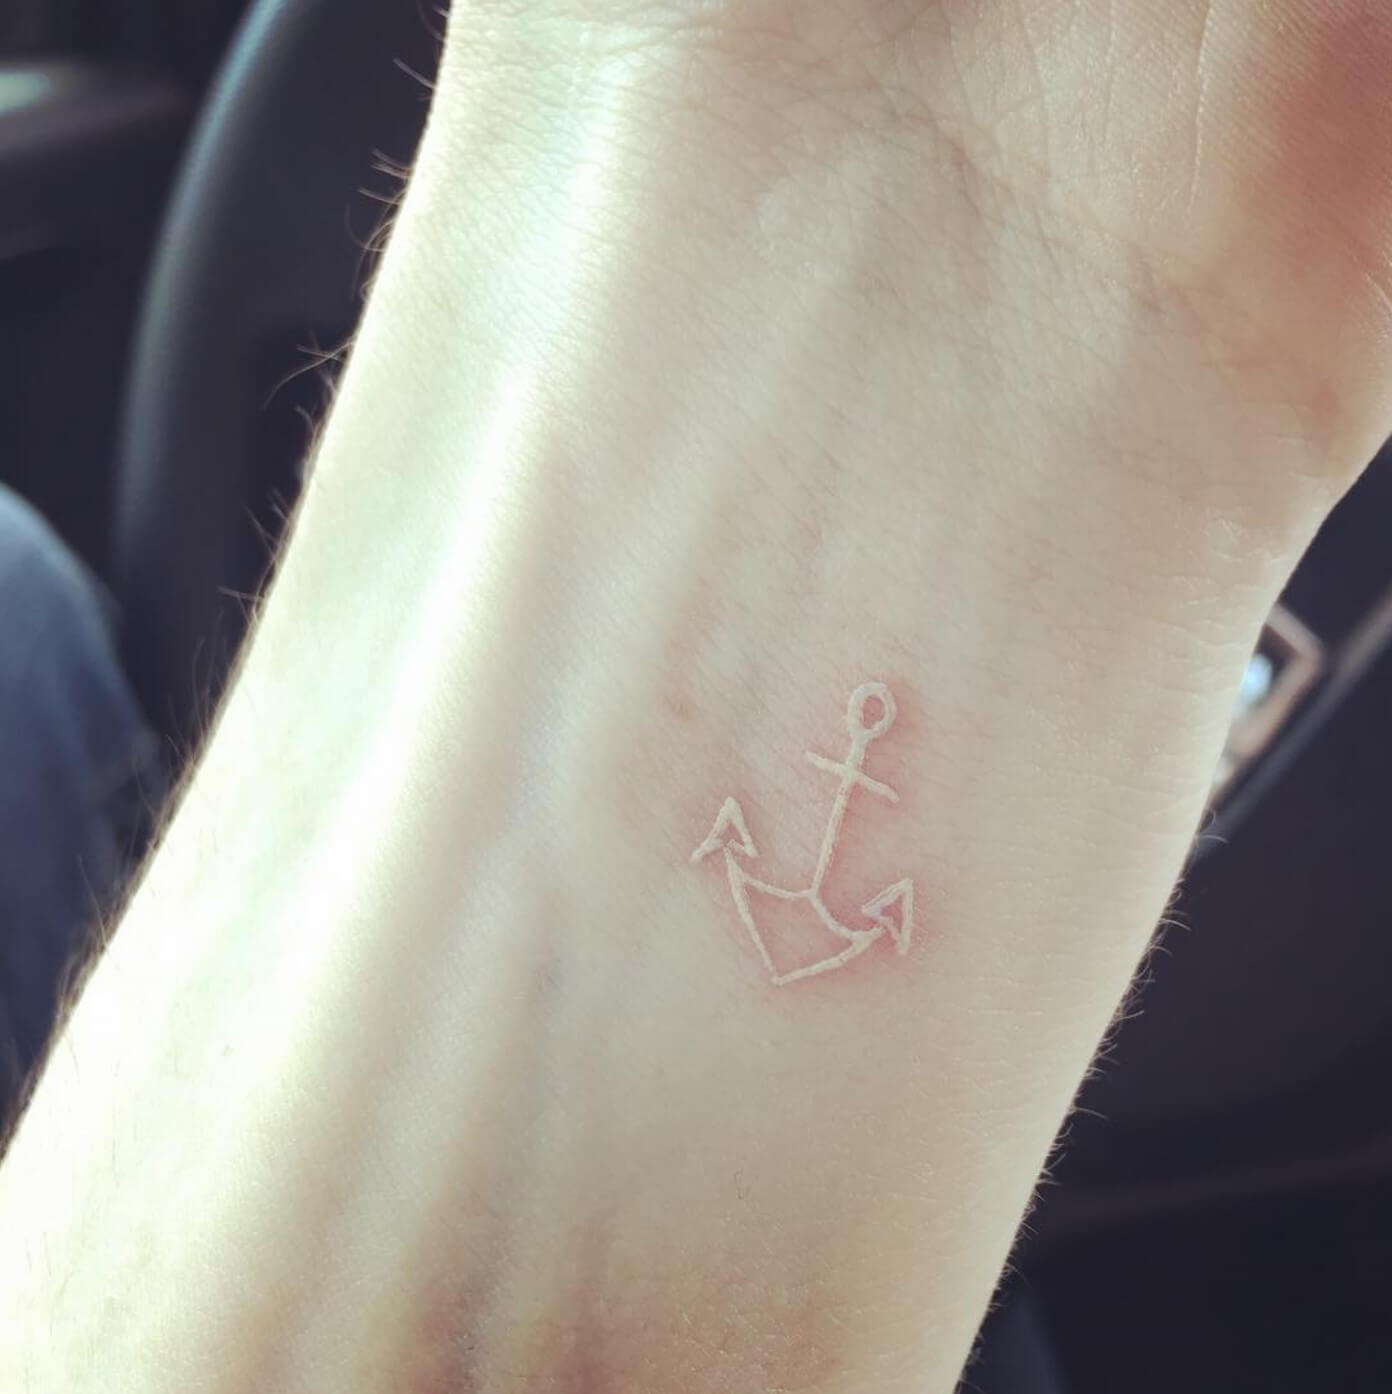 Anchor tattoo made with white ink